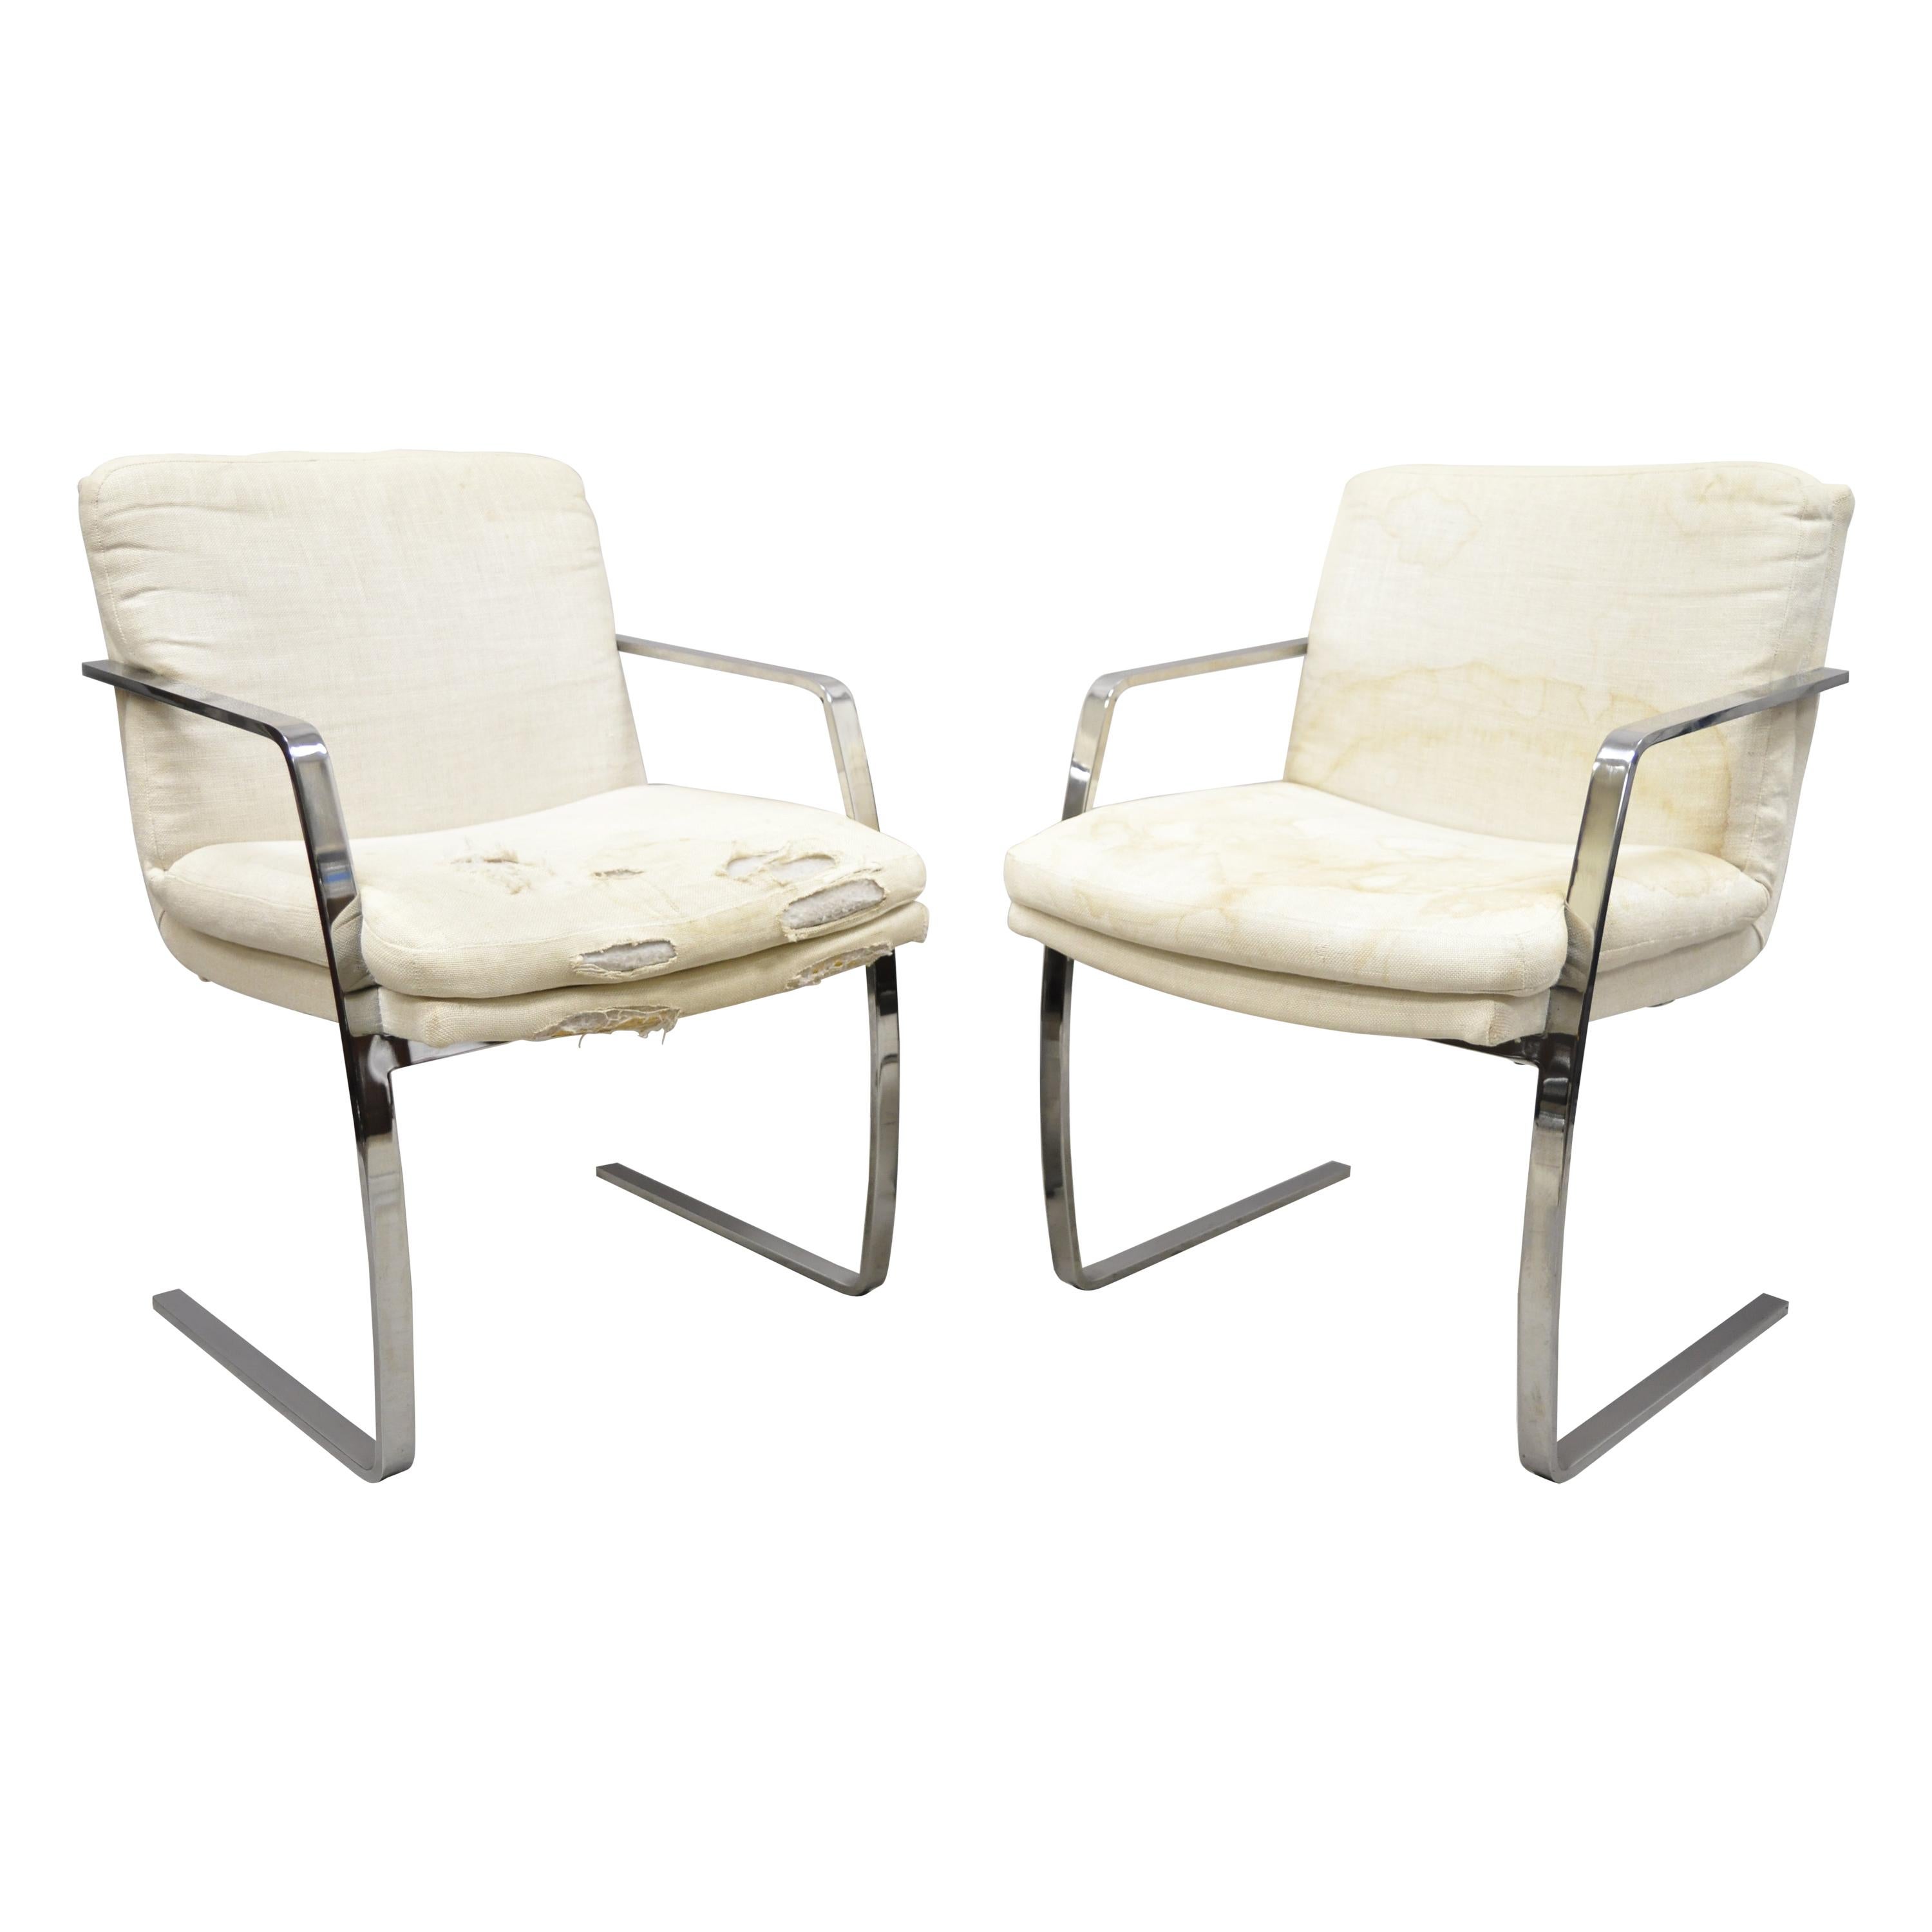 Mid-Century Modern BRNO Style Chrome Cantilever Lounge Armchairs 'C', a Pair For Sale